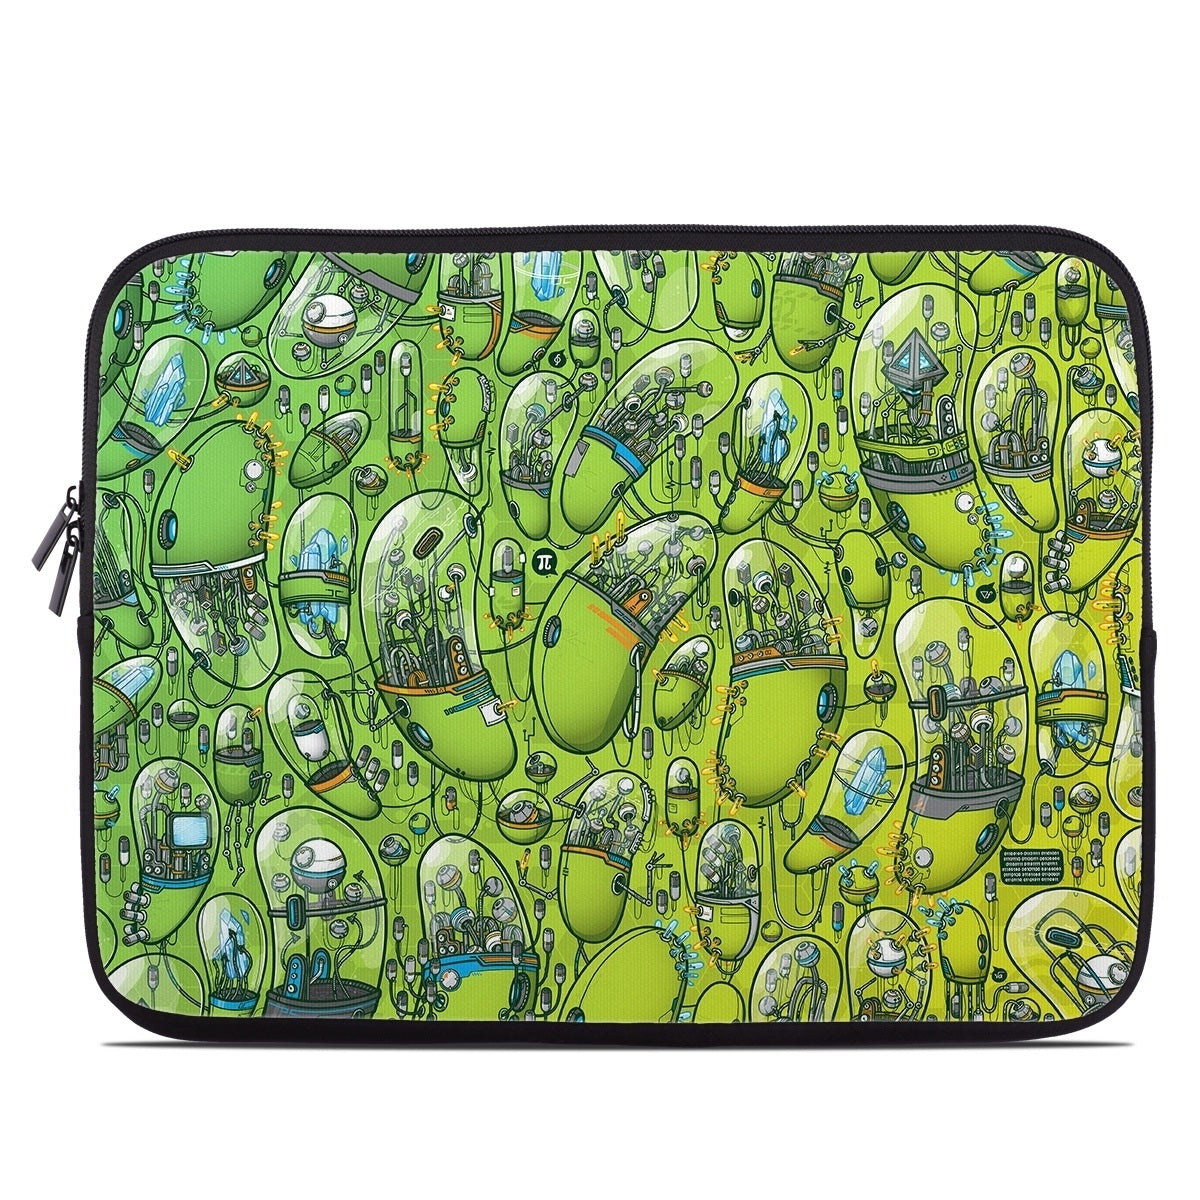 The Hive - Laptop Sleeve